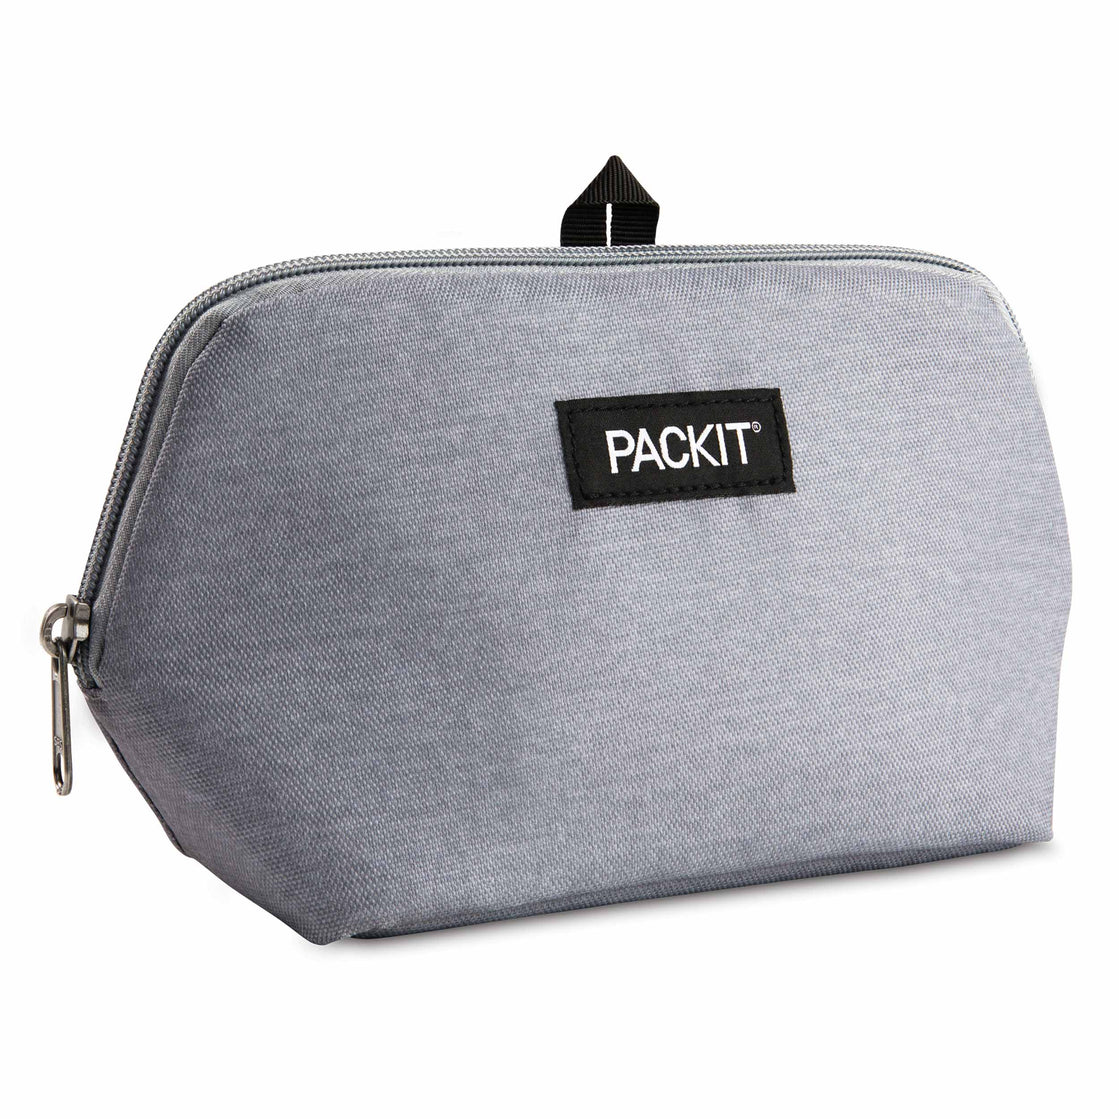 Packit Personal Cooler - Charcoal Camo